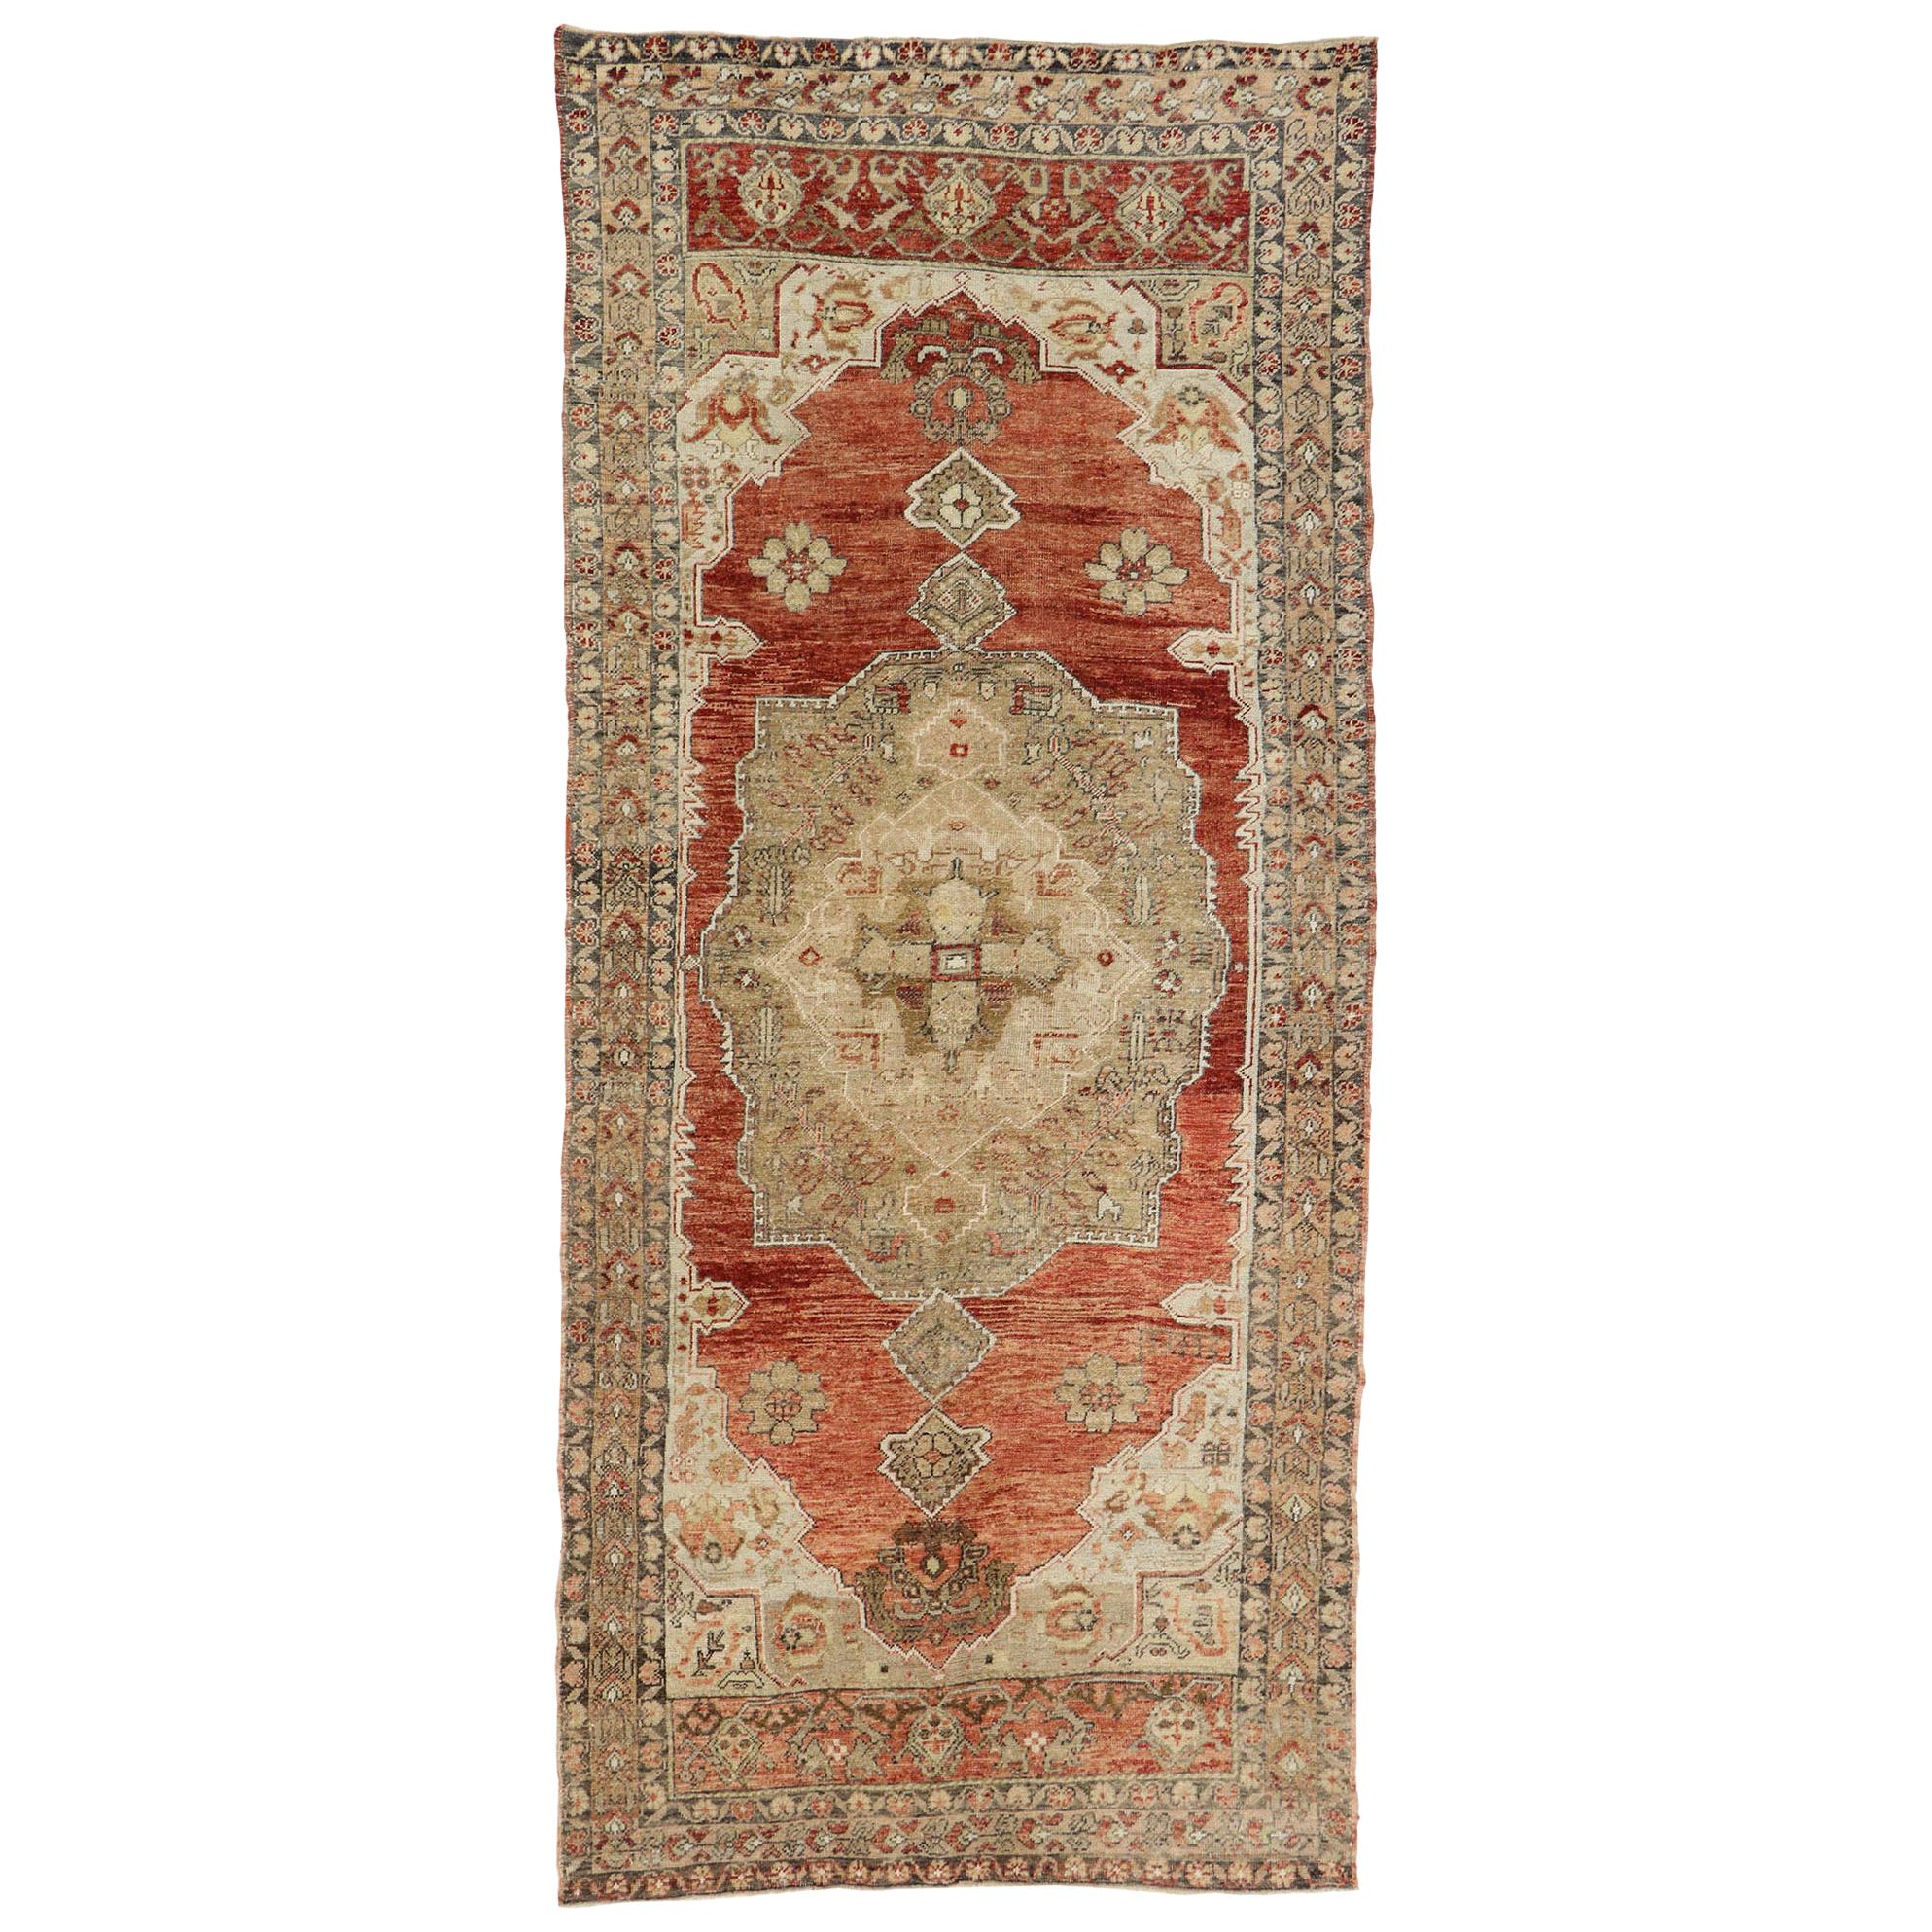 Vintage Turkish Oushak Gallery Rug with Rustic Spanish Colonial Style